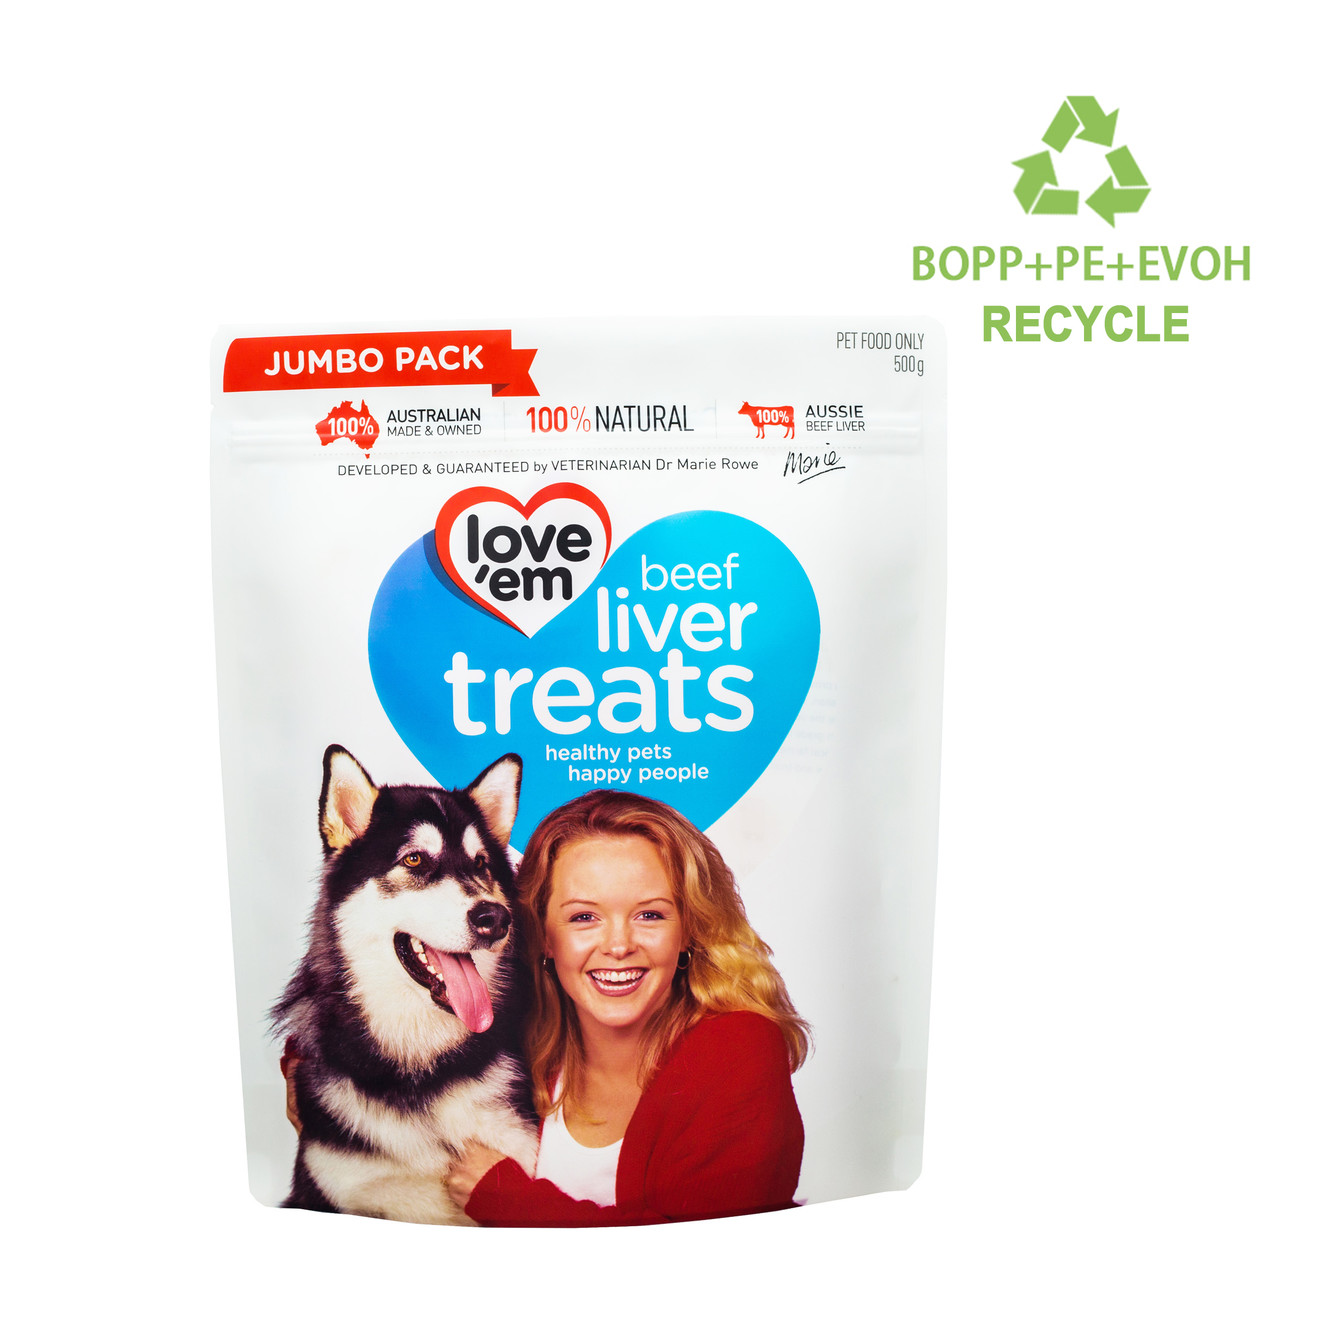  recyclable pet food packaging 